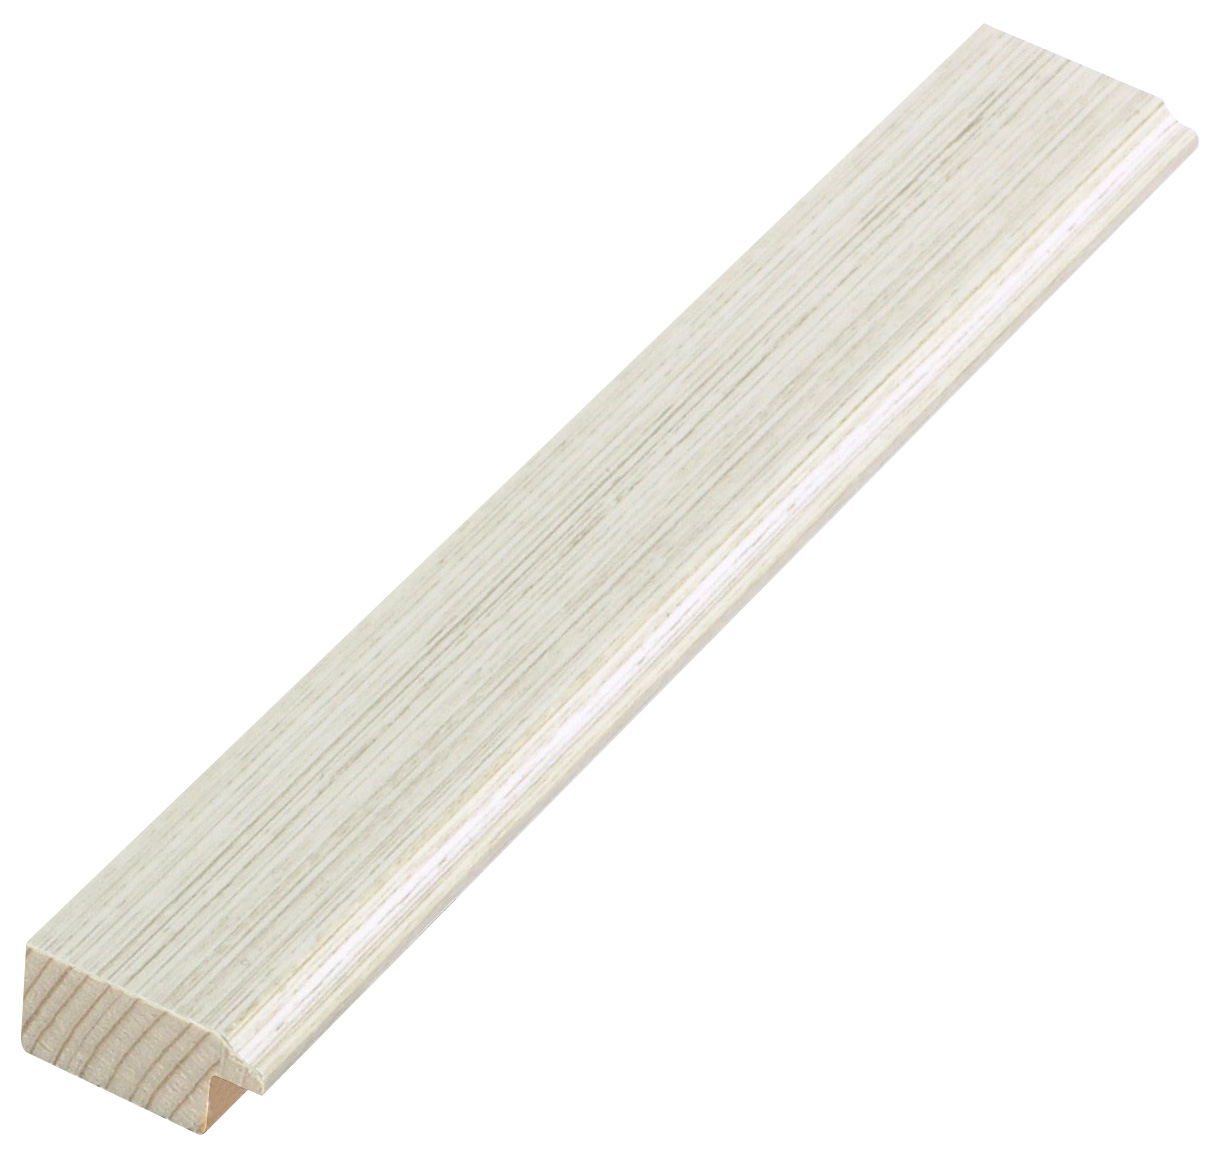 Liner finger-jointed pine 28mm - Cream, wired texture - 28CREMA